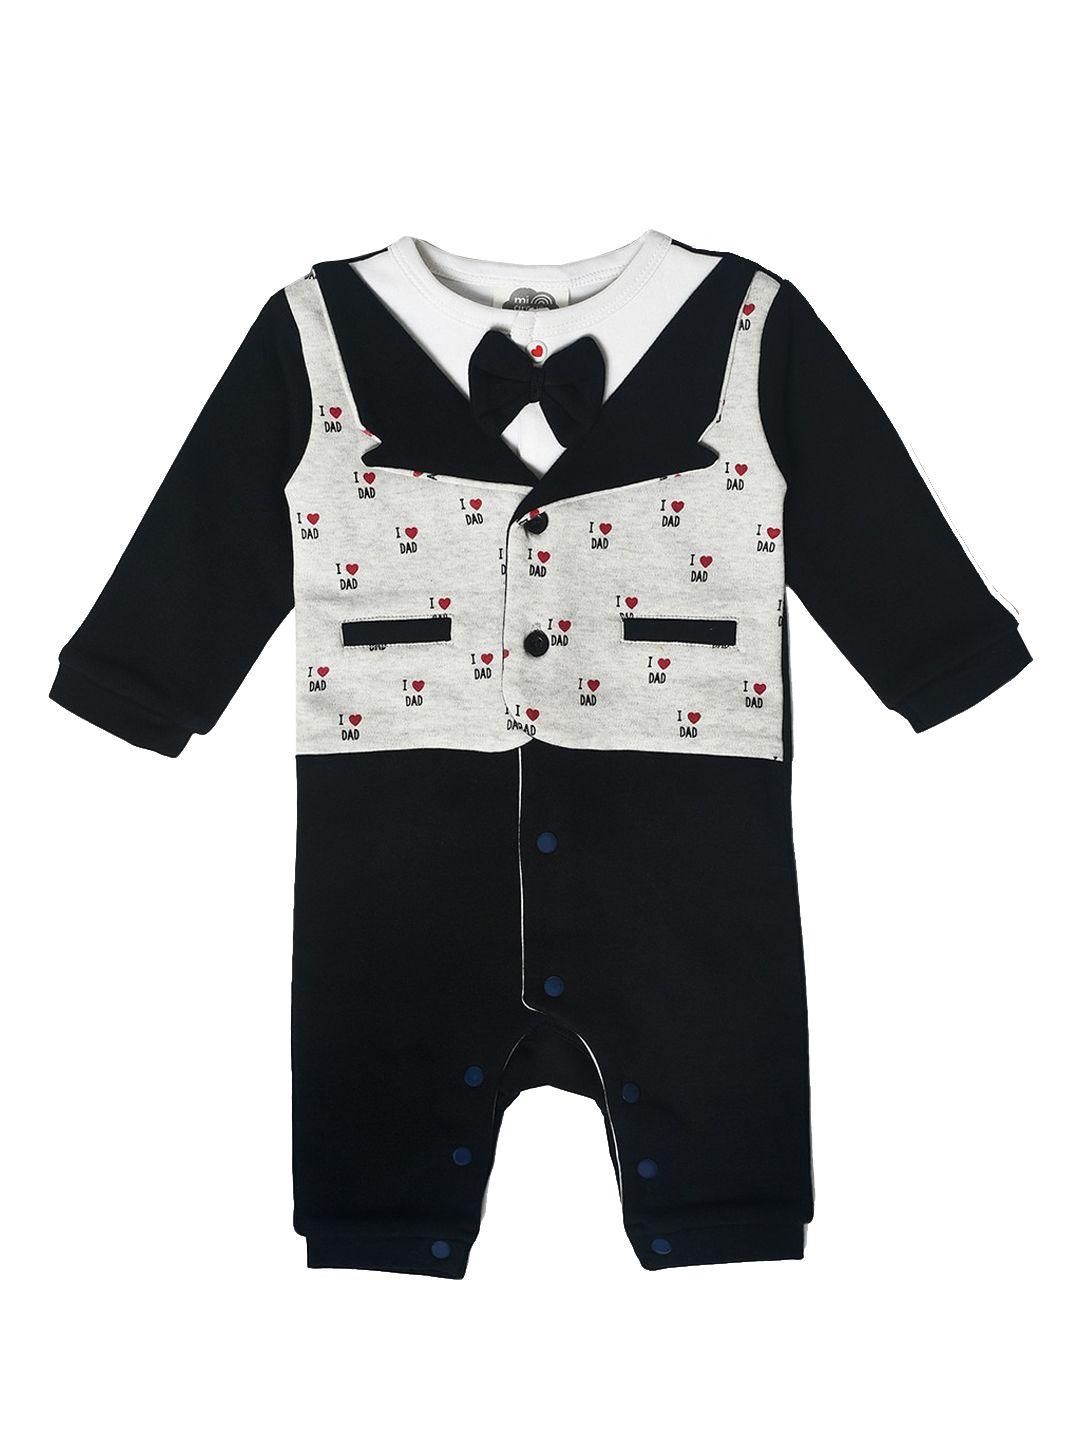 miarcus boys black knitted jacquard overall rompers